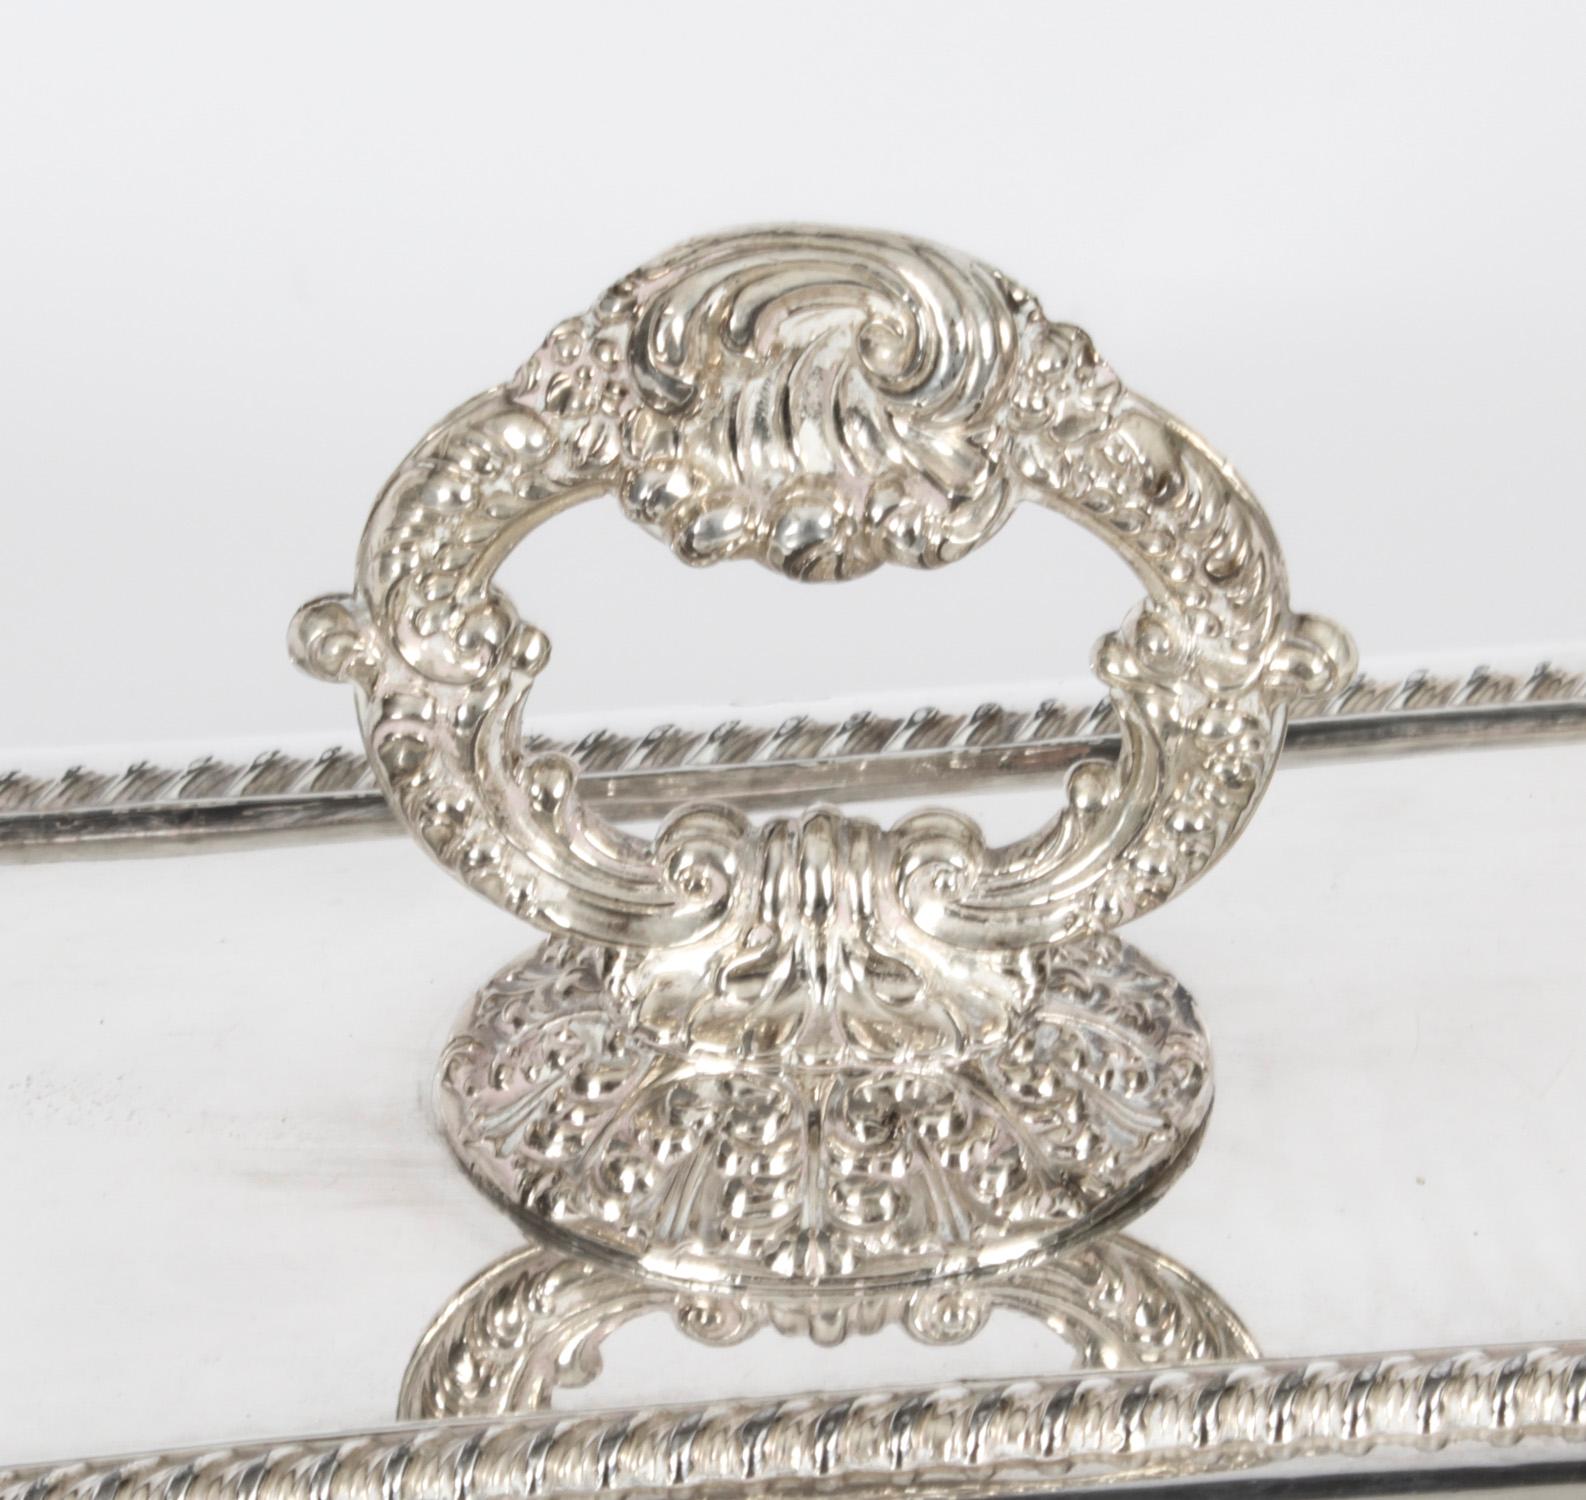 Antique Pair of English Silver Plated Entrée Dishes, Mid-19th Century 4